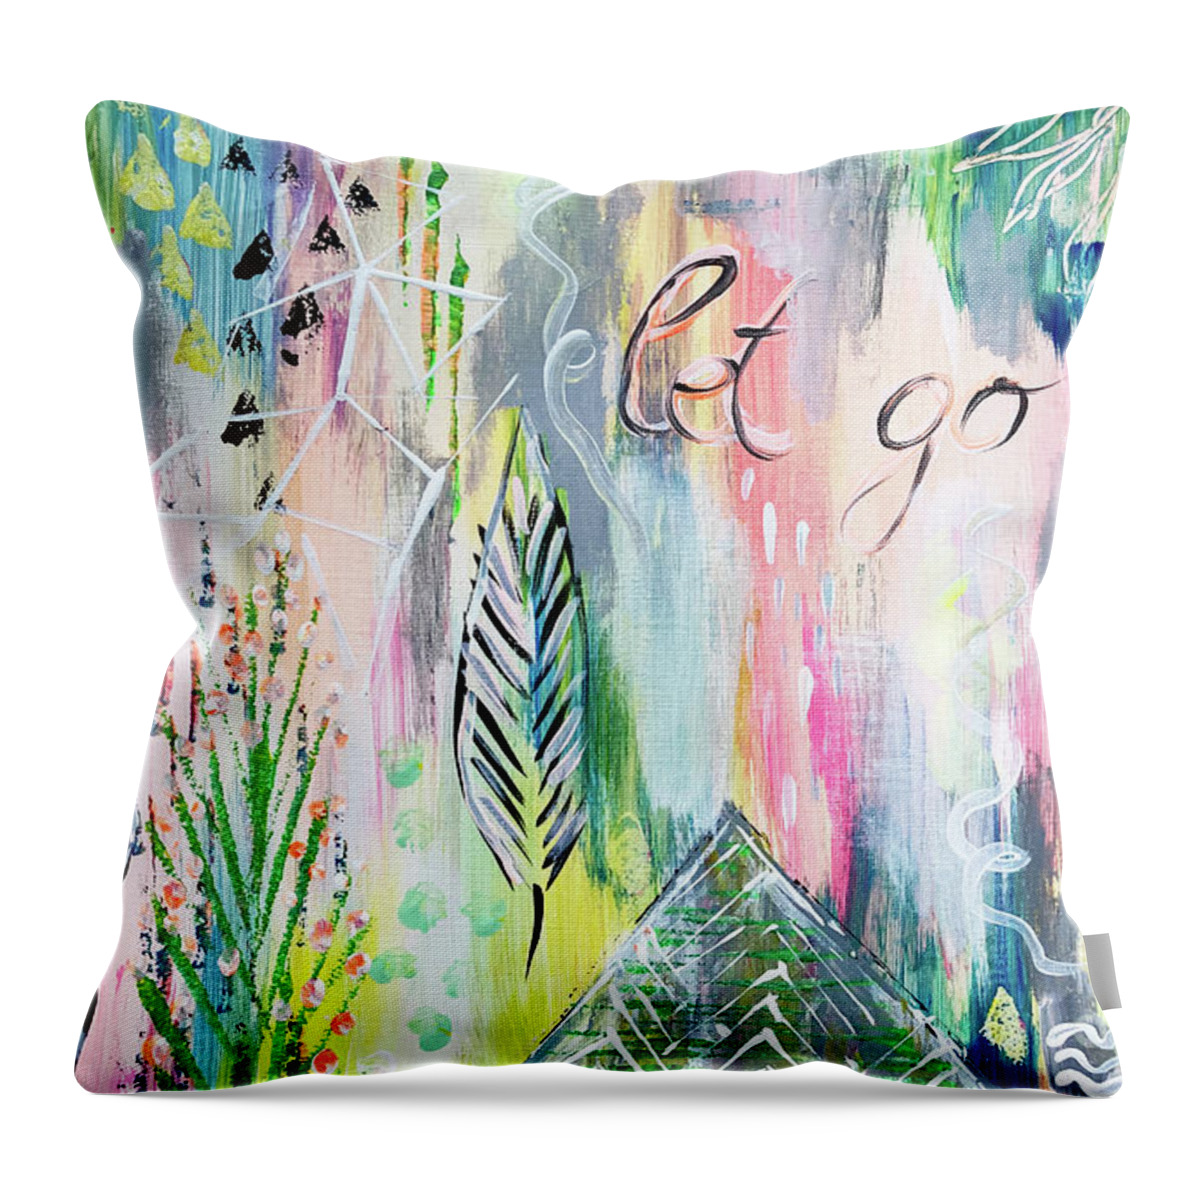 Let Go Throw Pillow featuring the painting Let go by Claudia Schoen